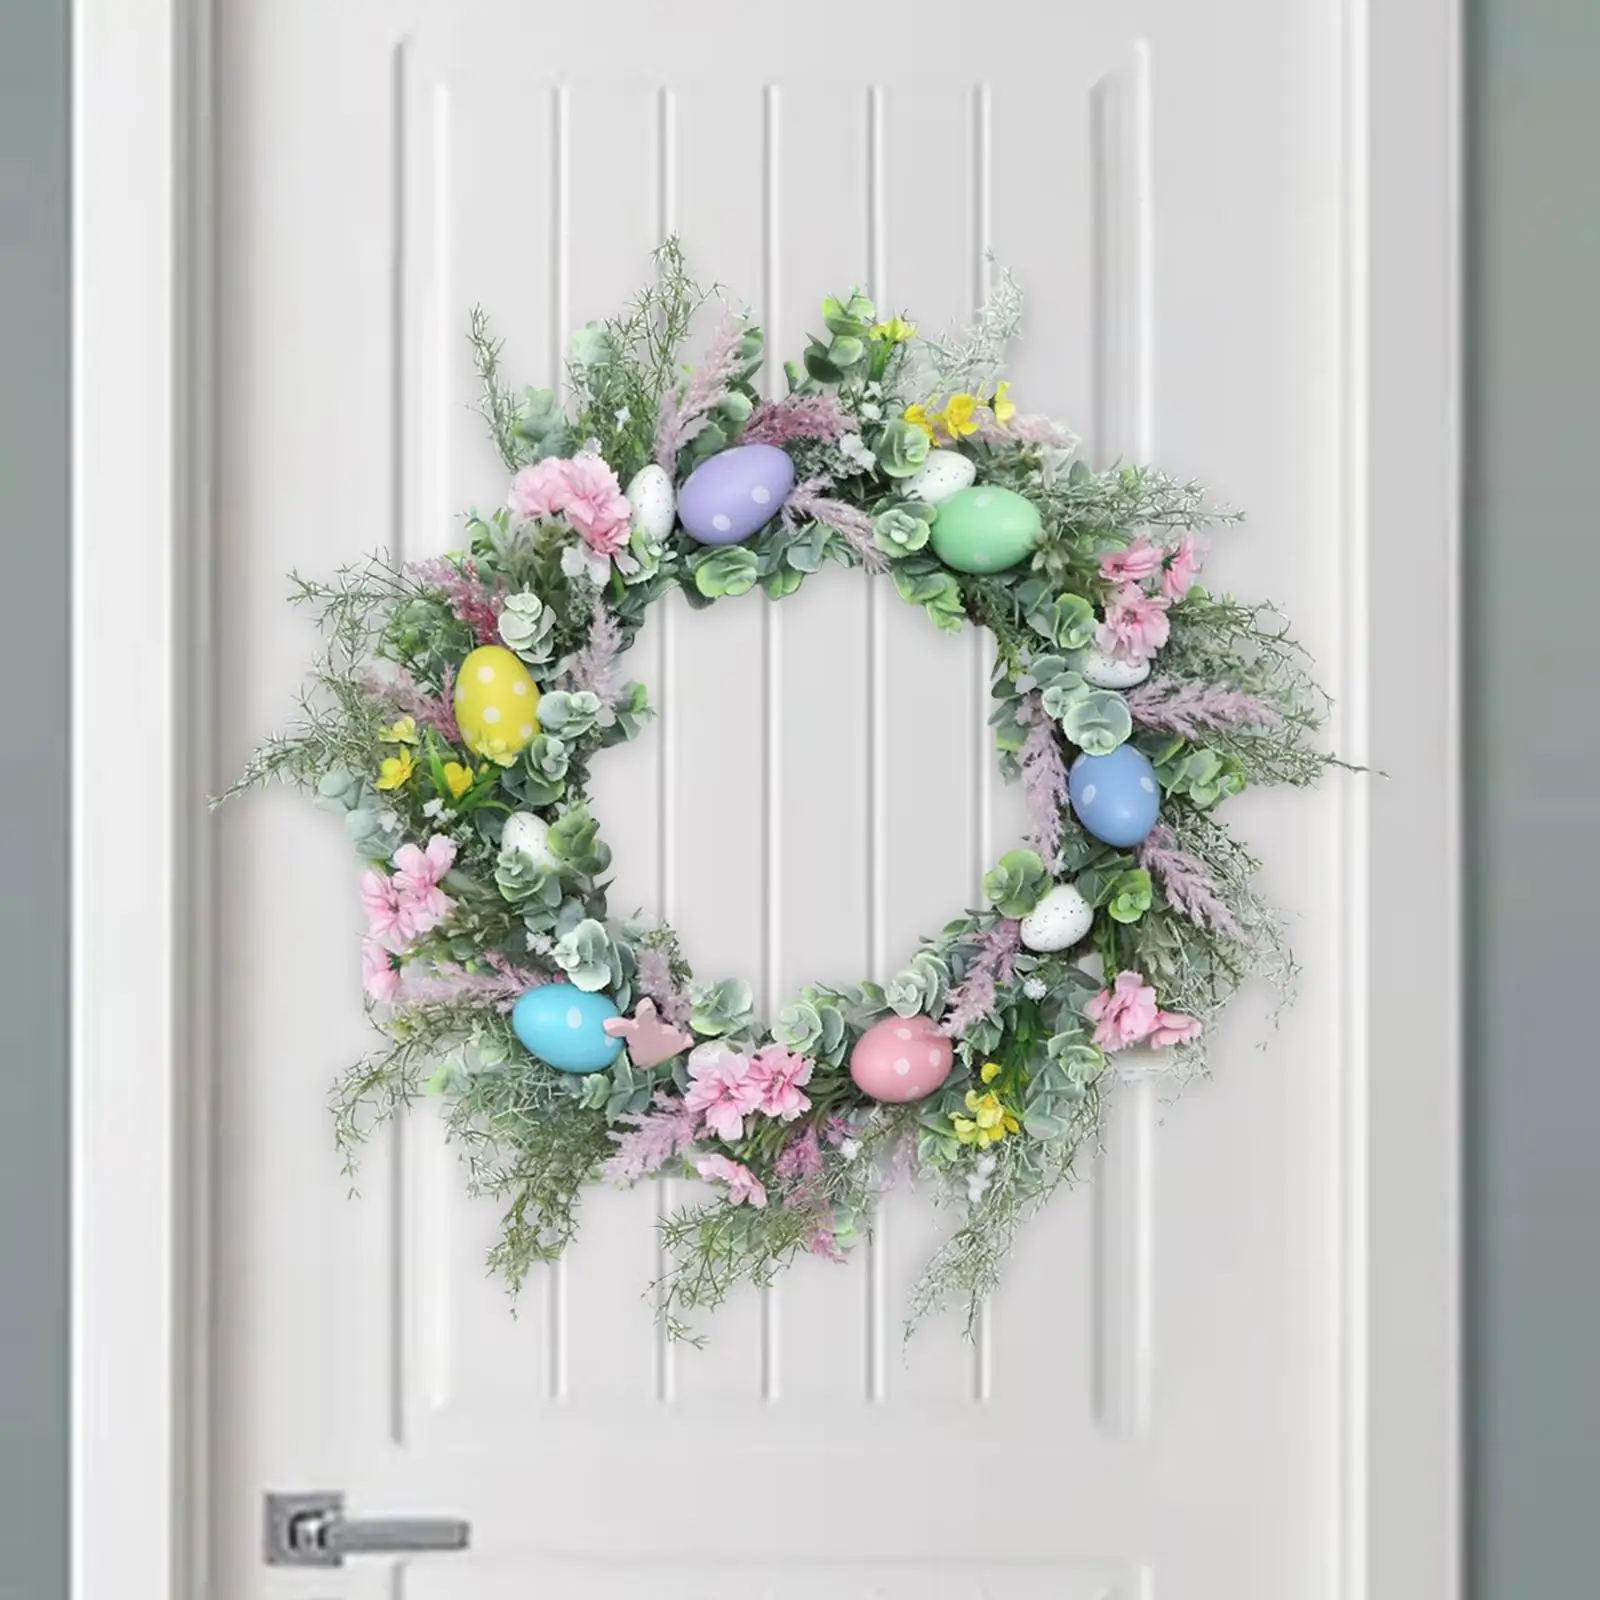 Round Easter Egg Flower Wreath Front Door Spring Window Artificial Green Leaves Garland for Holiday Garden Decoration Ornament